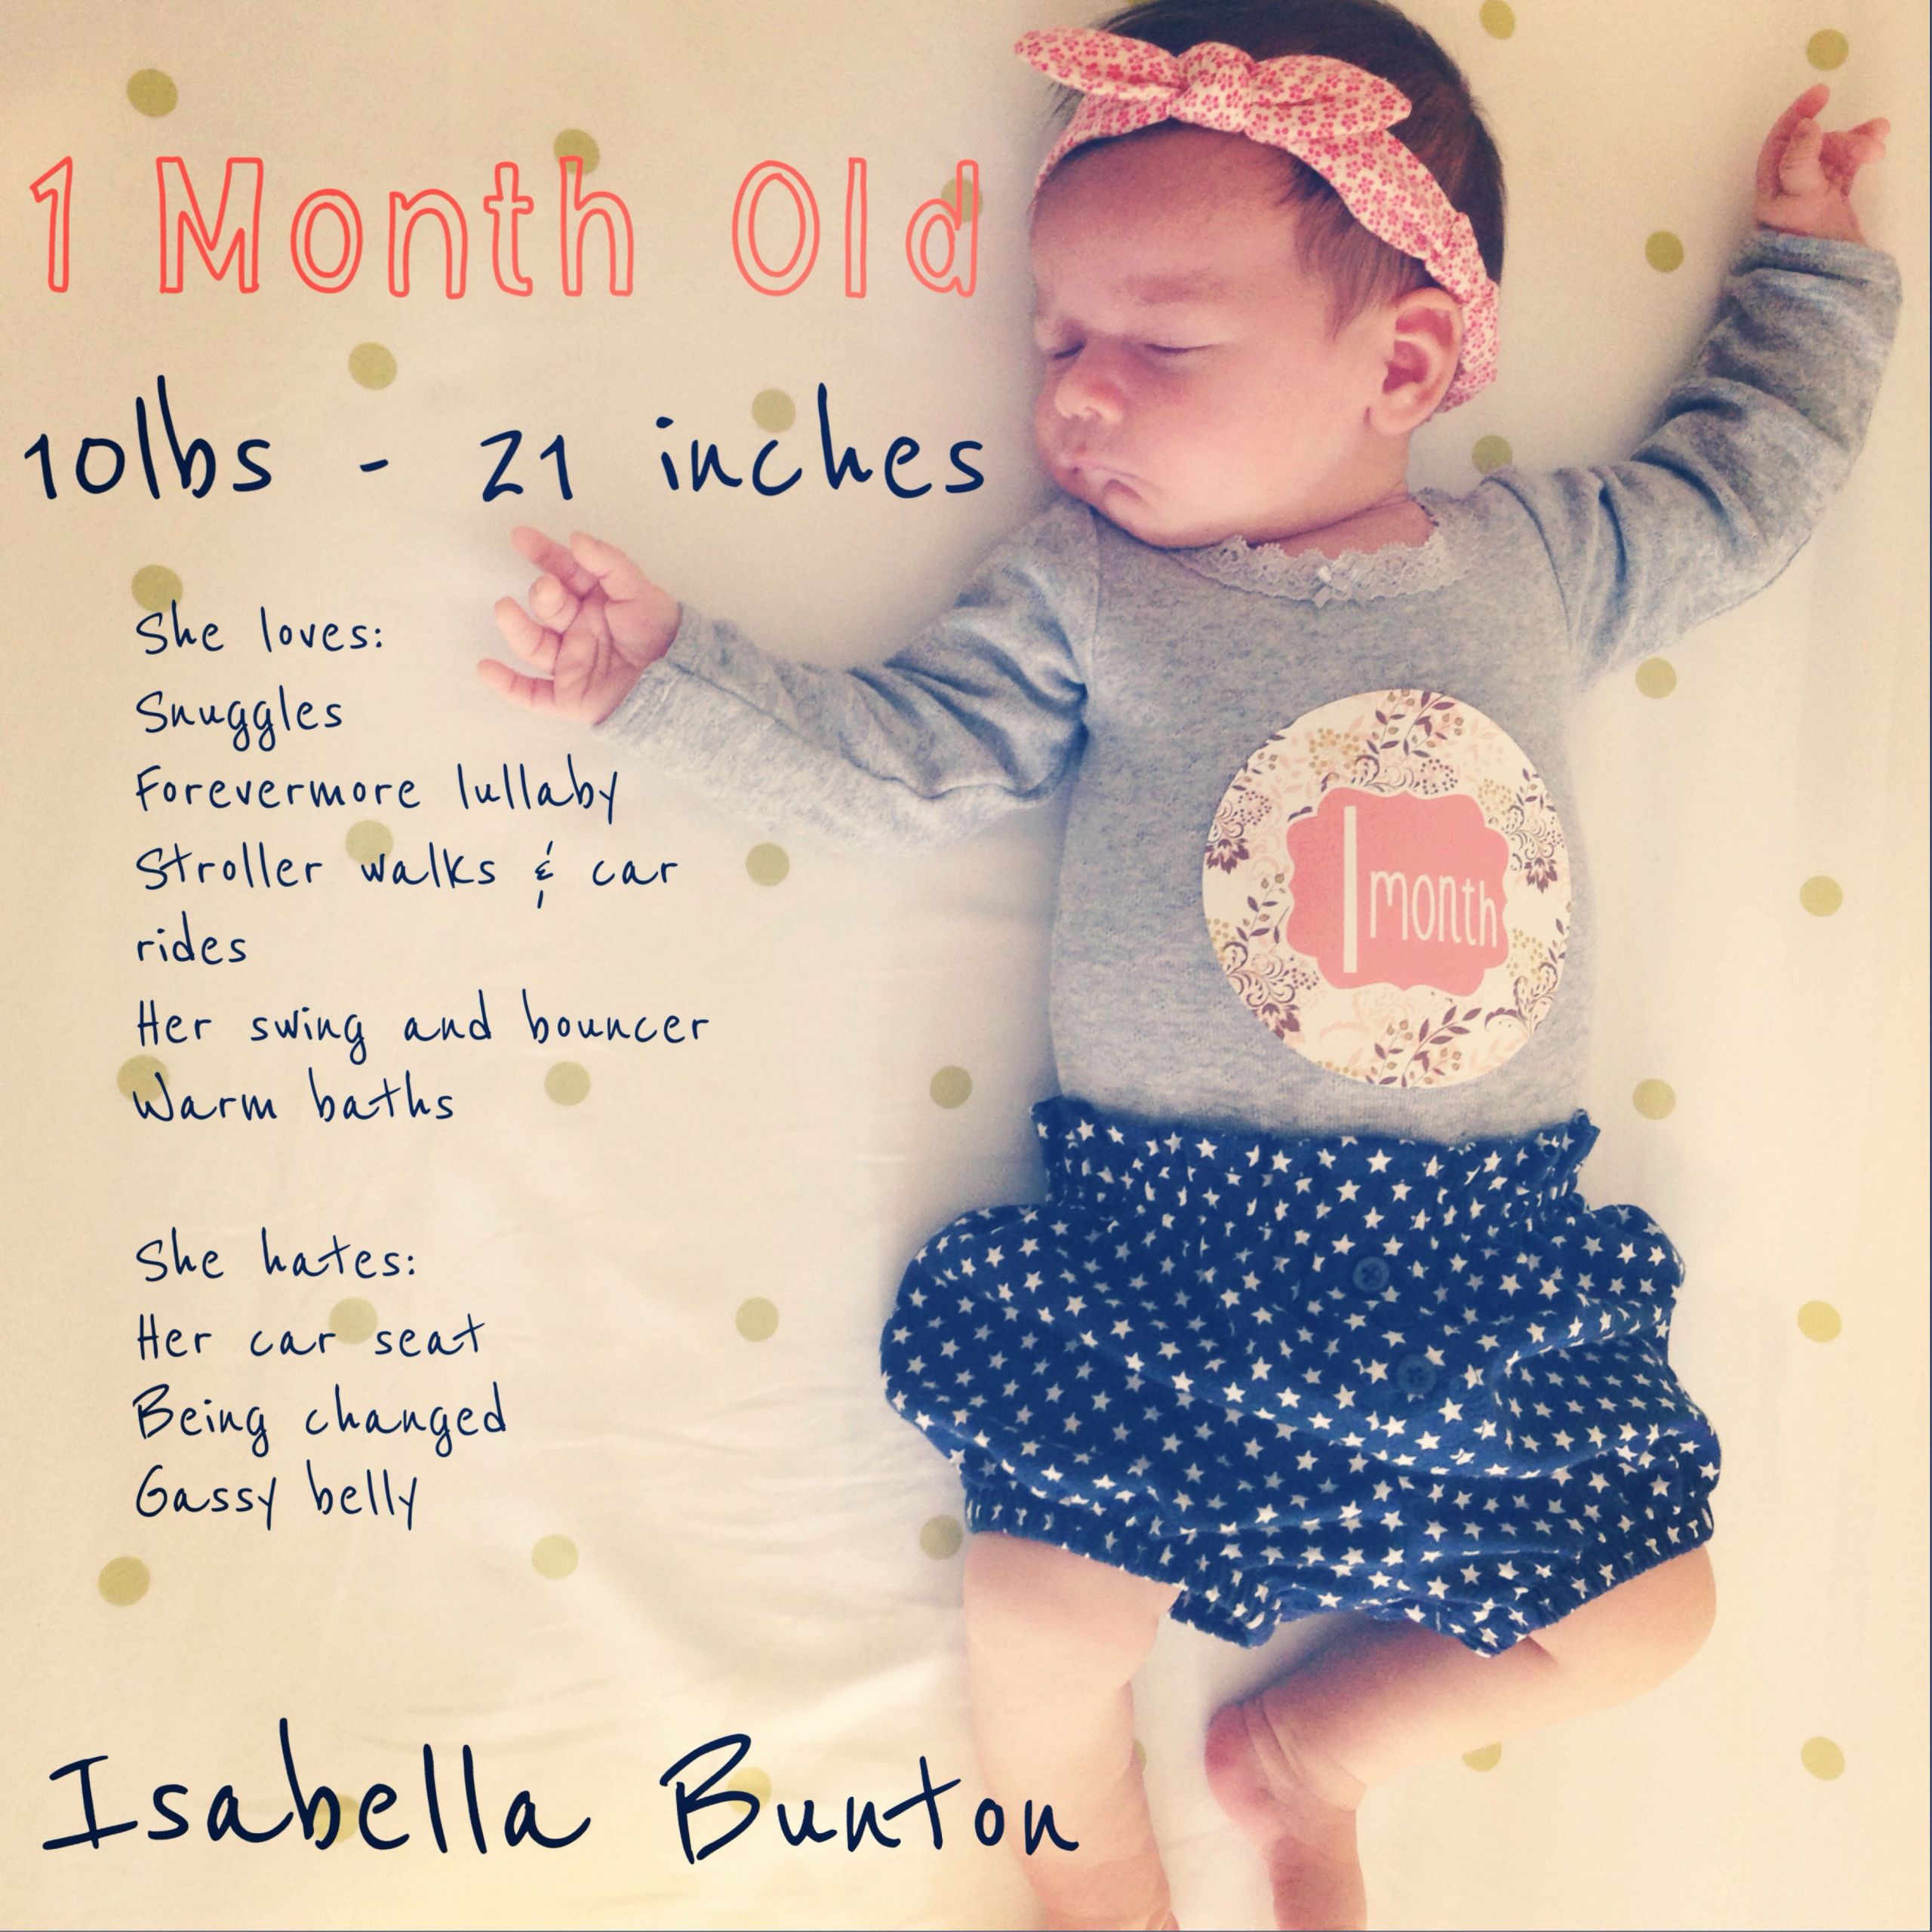 7 Months Old Baby Quotes
 1 month old picture